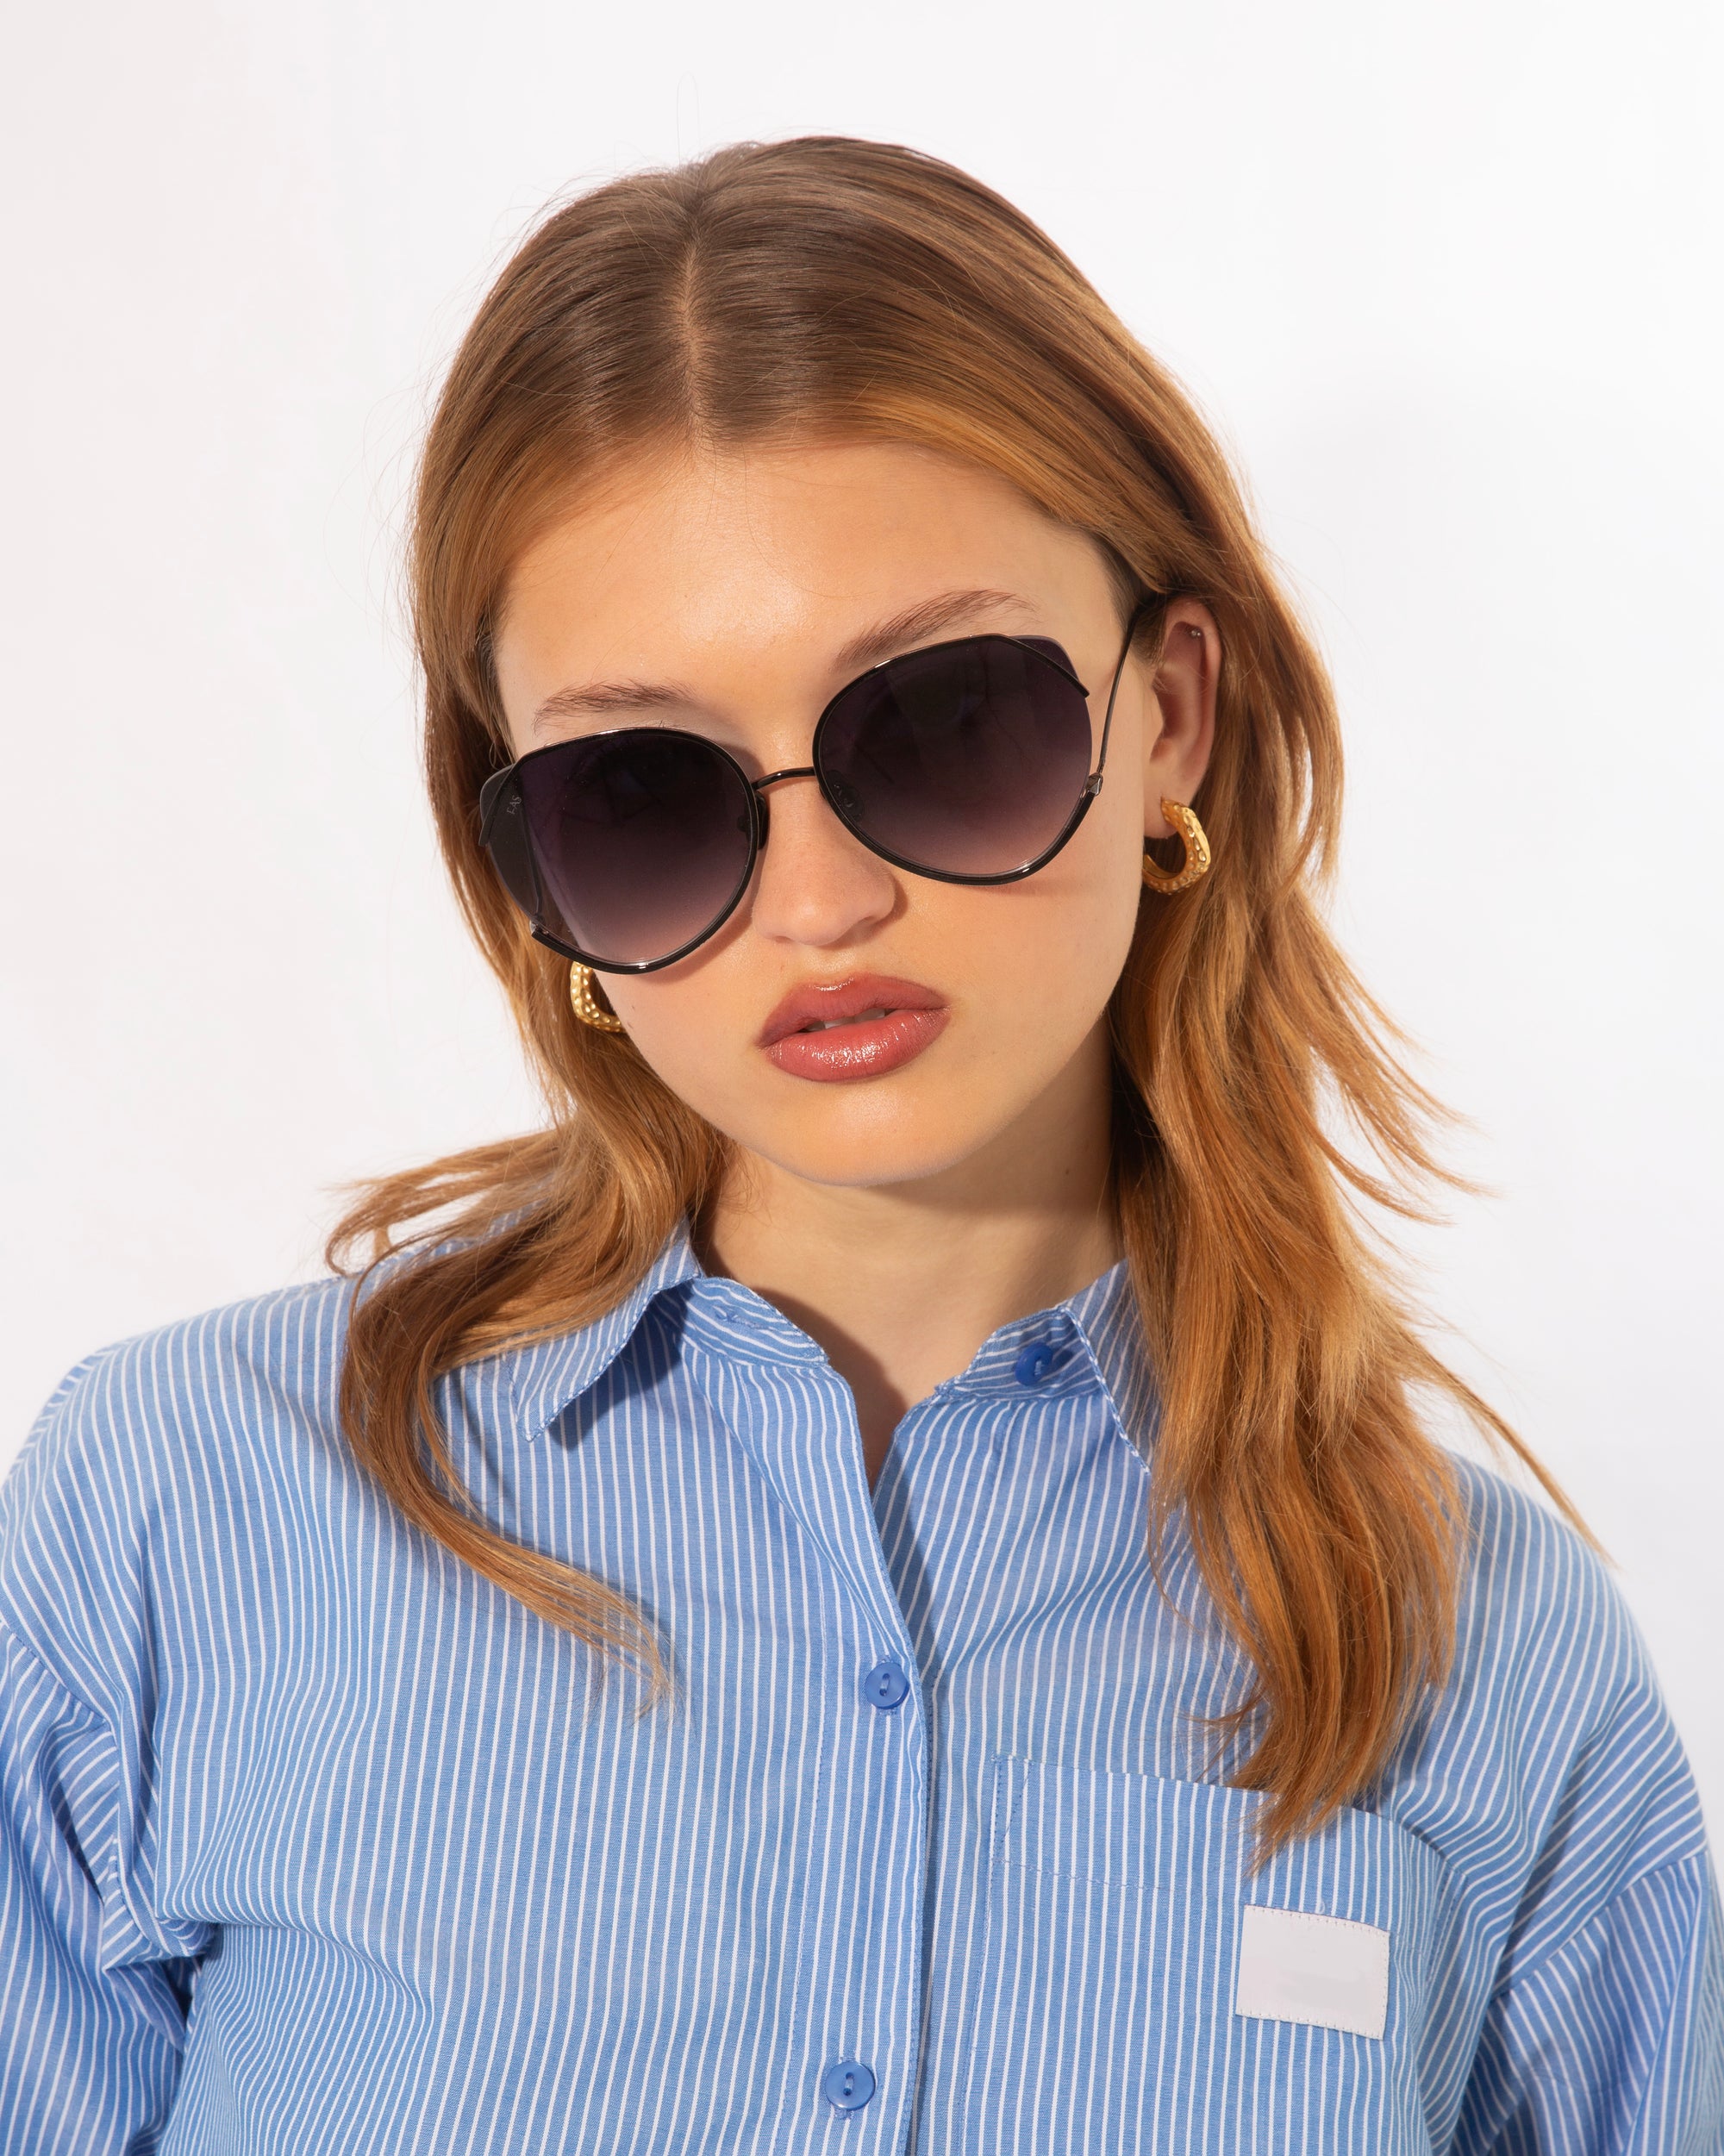 A woman wearing large, round, dark sunglasses with ultralightweight lenses and jadestone nose pads gazes into the camera. She has long, light brown hair and is dressed in a blue and white striped shirt. The background is plain white, highlighting her stylish For Art&#39;s Sake® Wonderland accessories offering 100% UV protection.